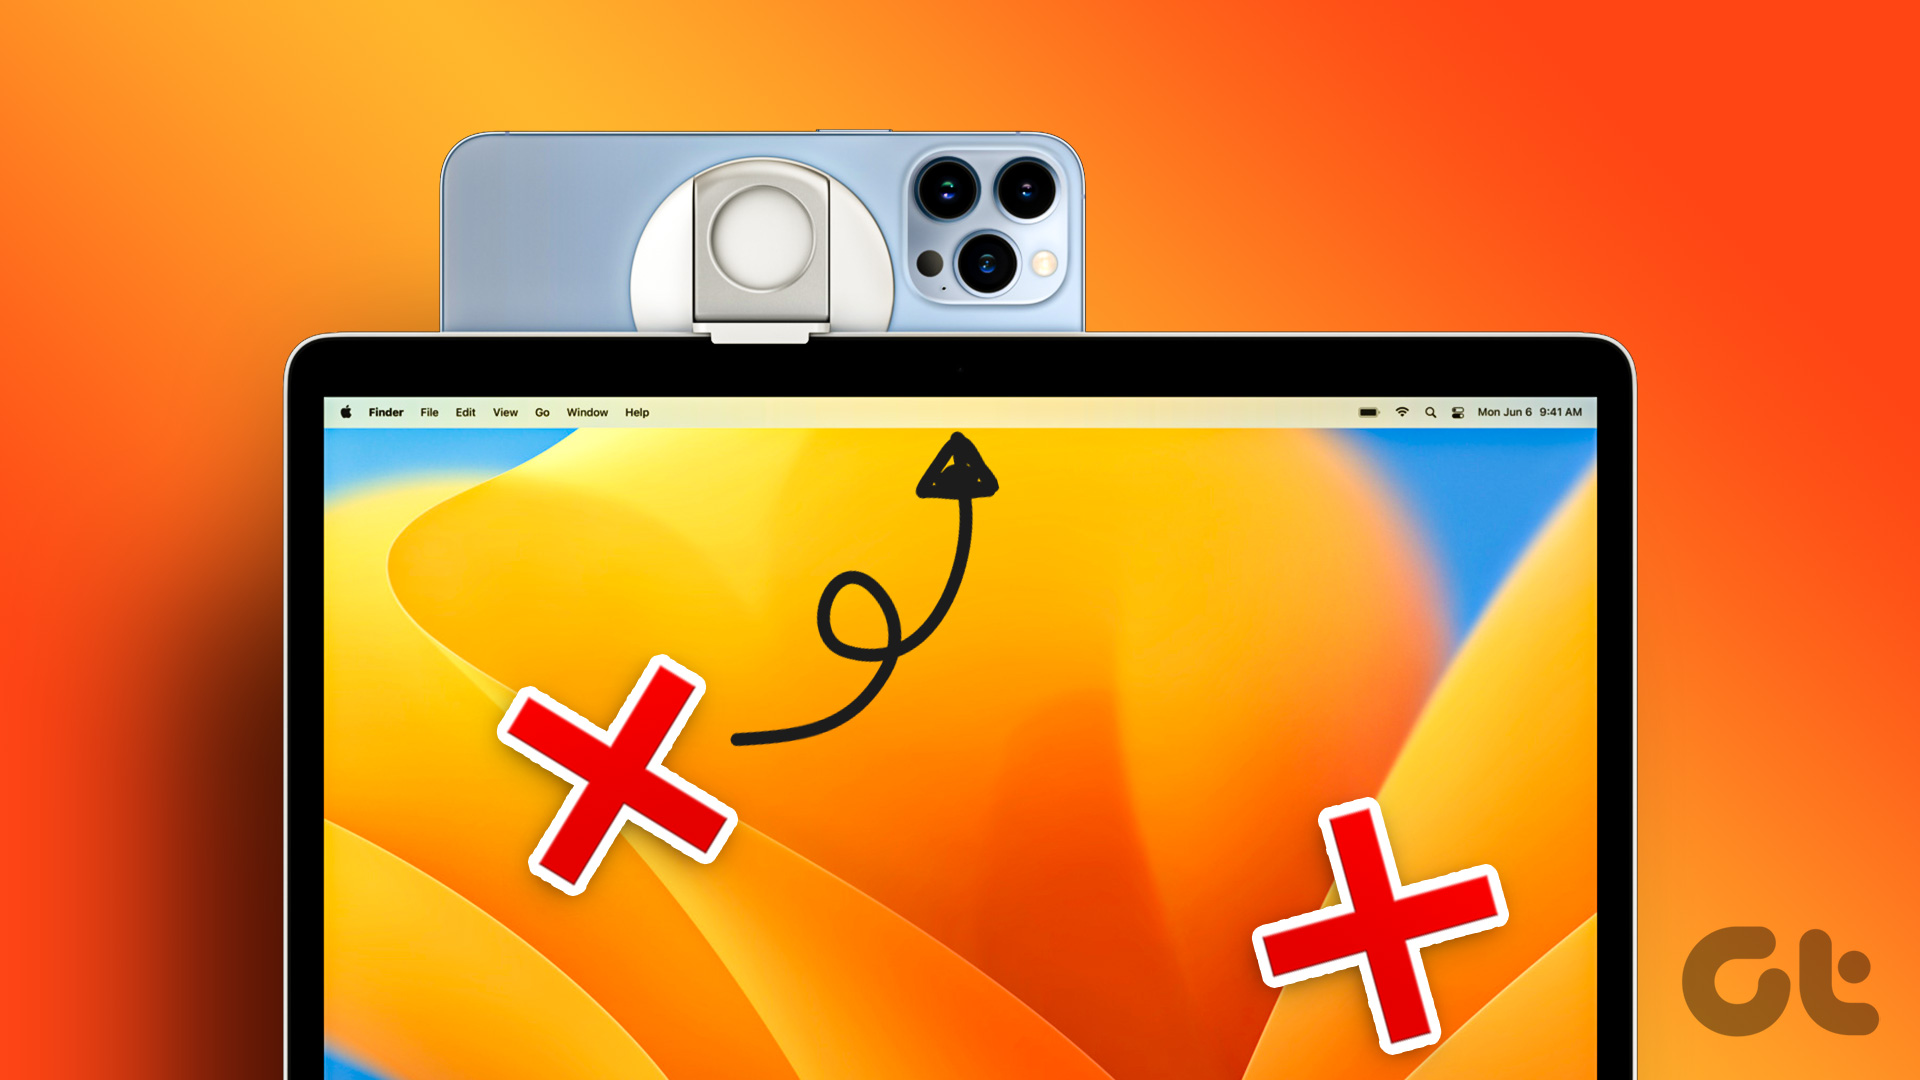 Continuity Camera: Use iPhone as a webcam for Mac - Apple Support